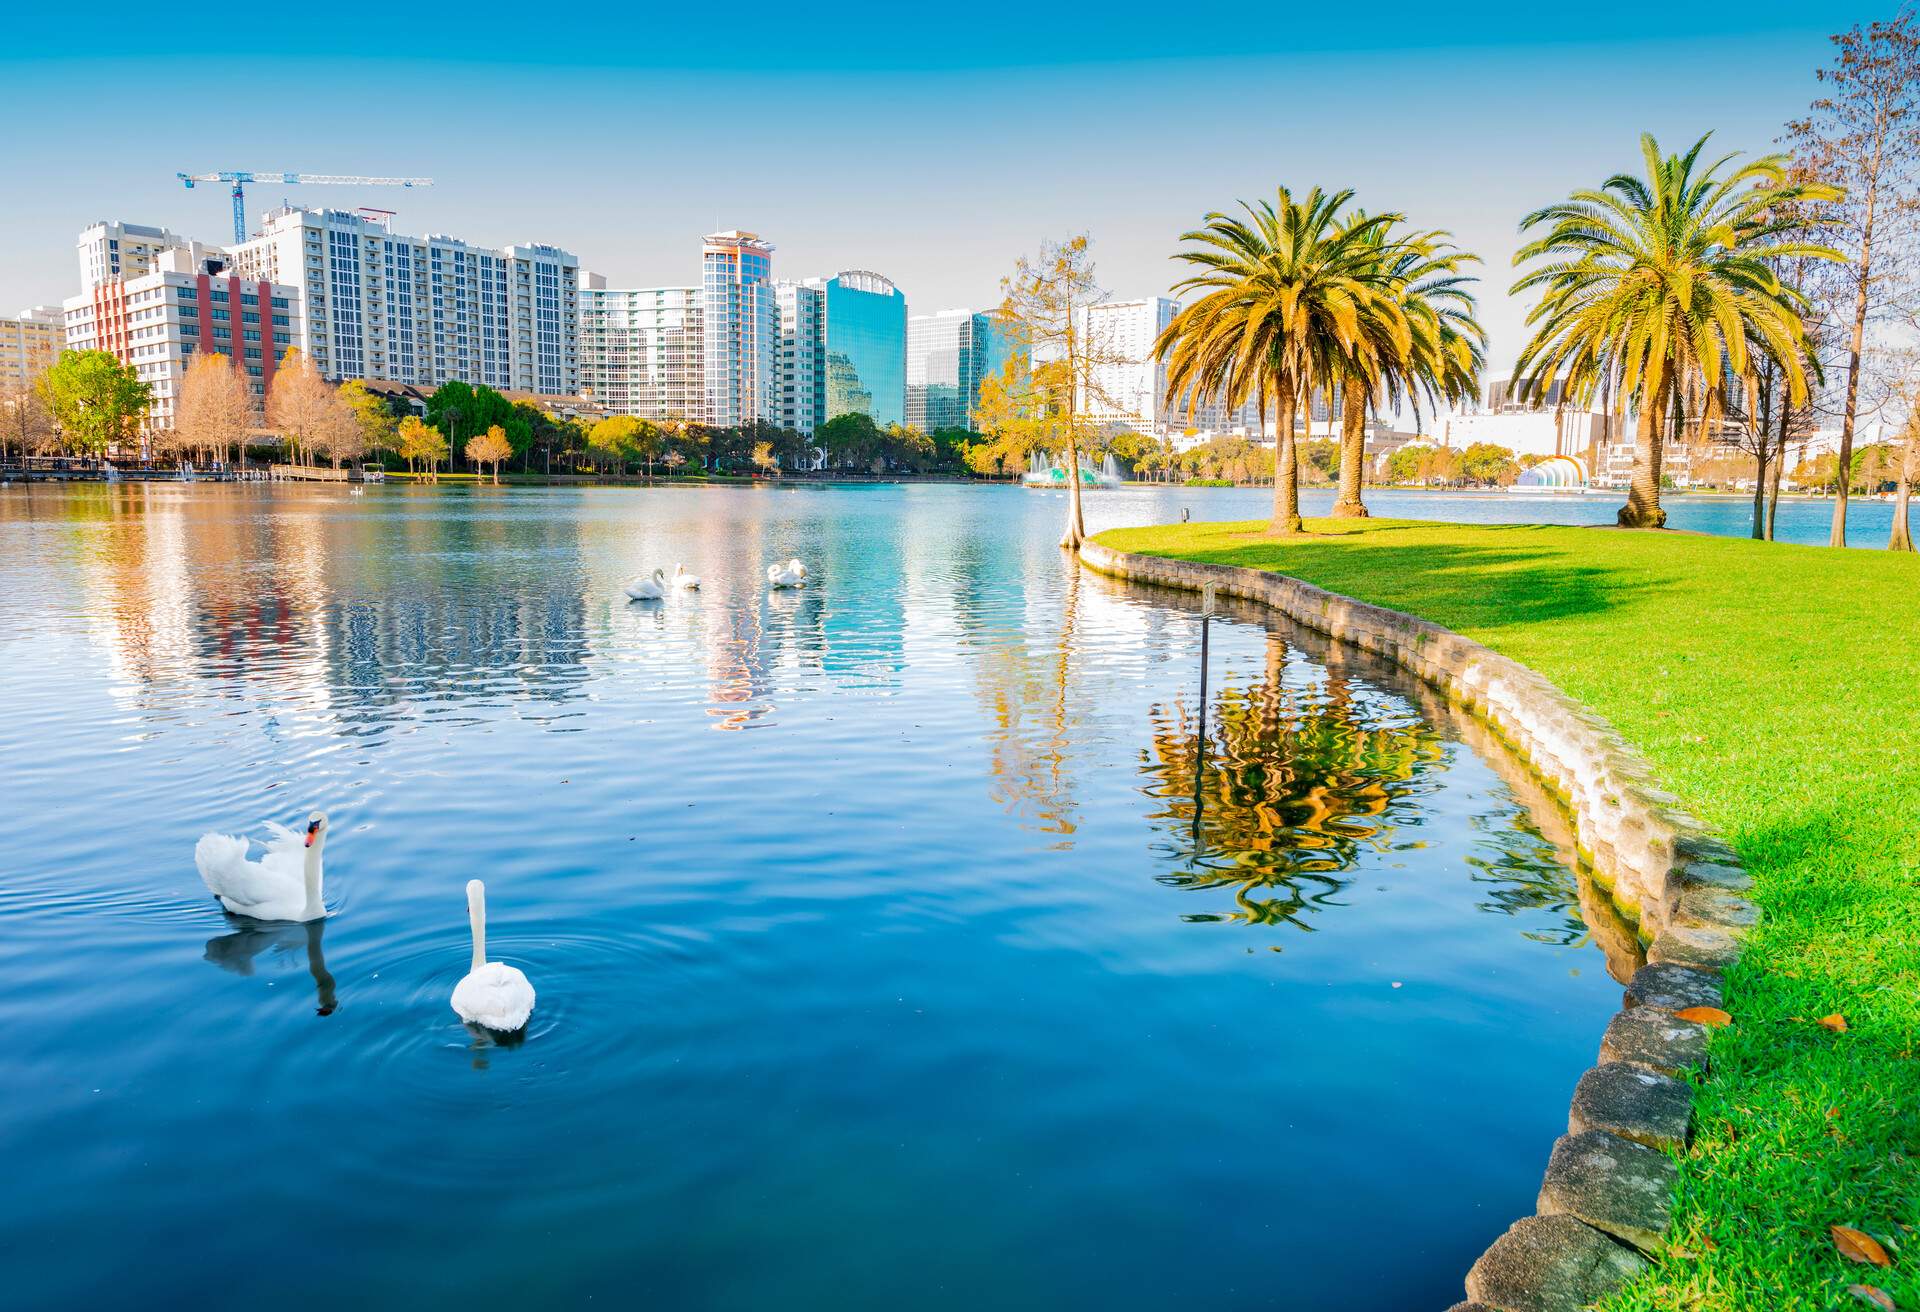 Beautiful scenery of white swans on a tranquil lake overlooking the urban cityscape.